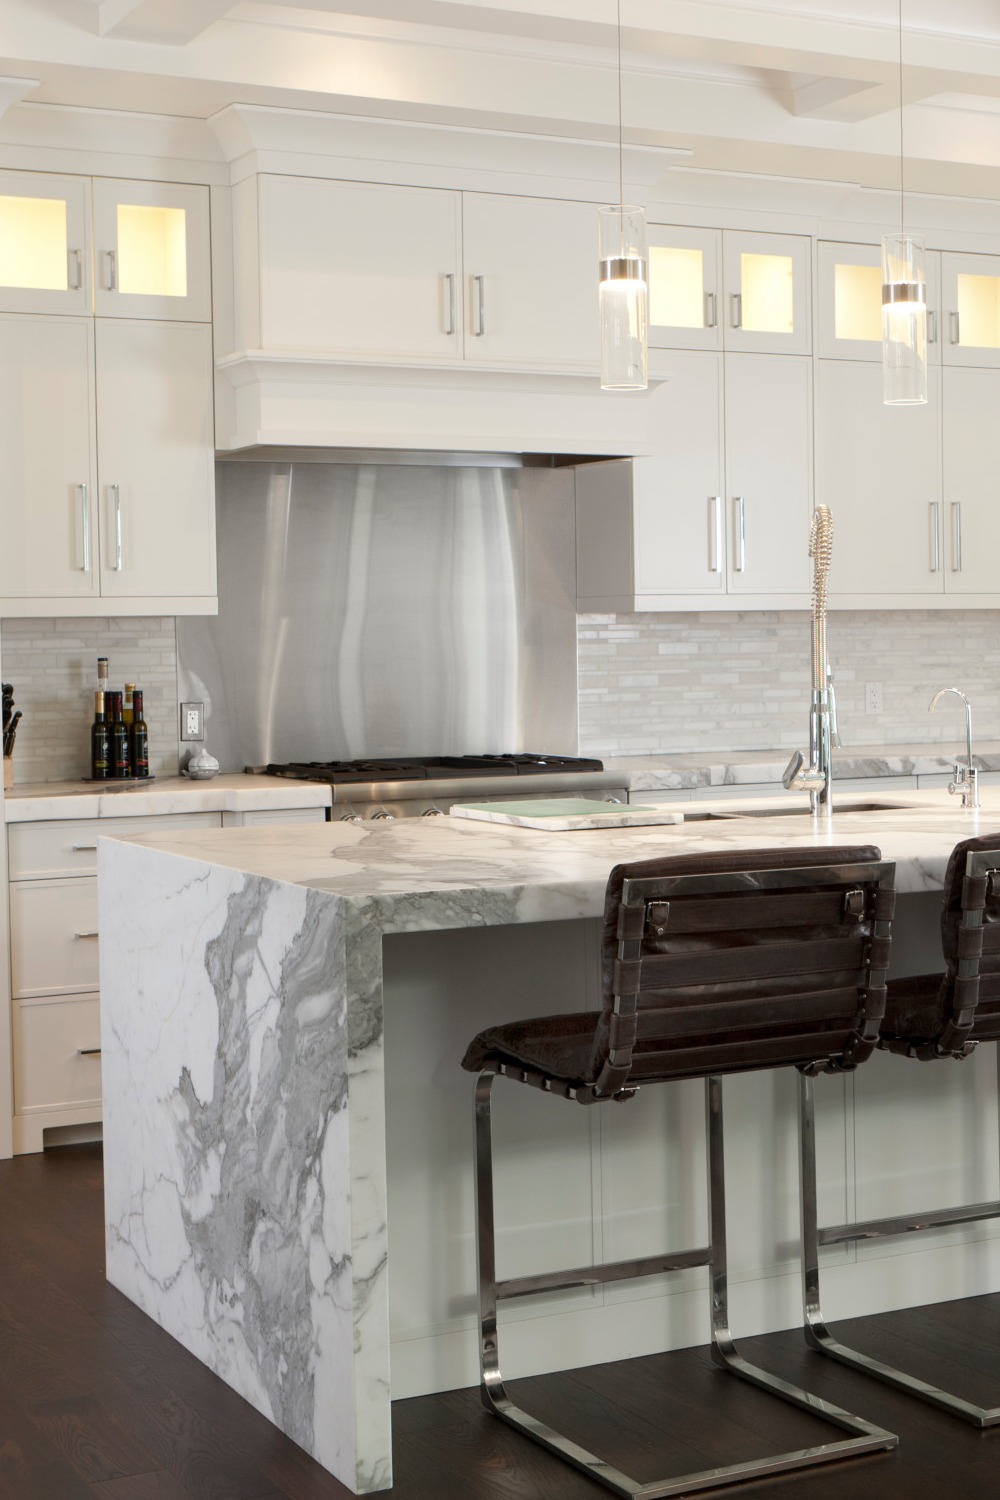 White Kitchen Cabinets Cabinetry Quartz Counters Pendant Lights Fabric Covered Chairs